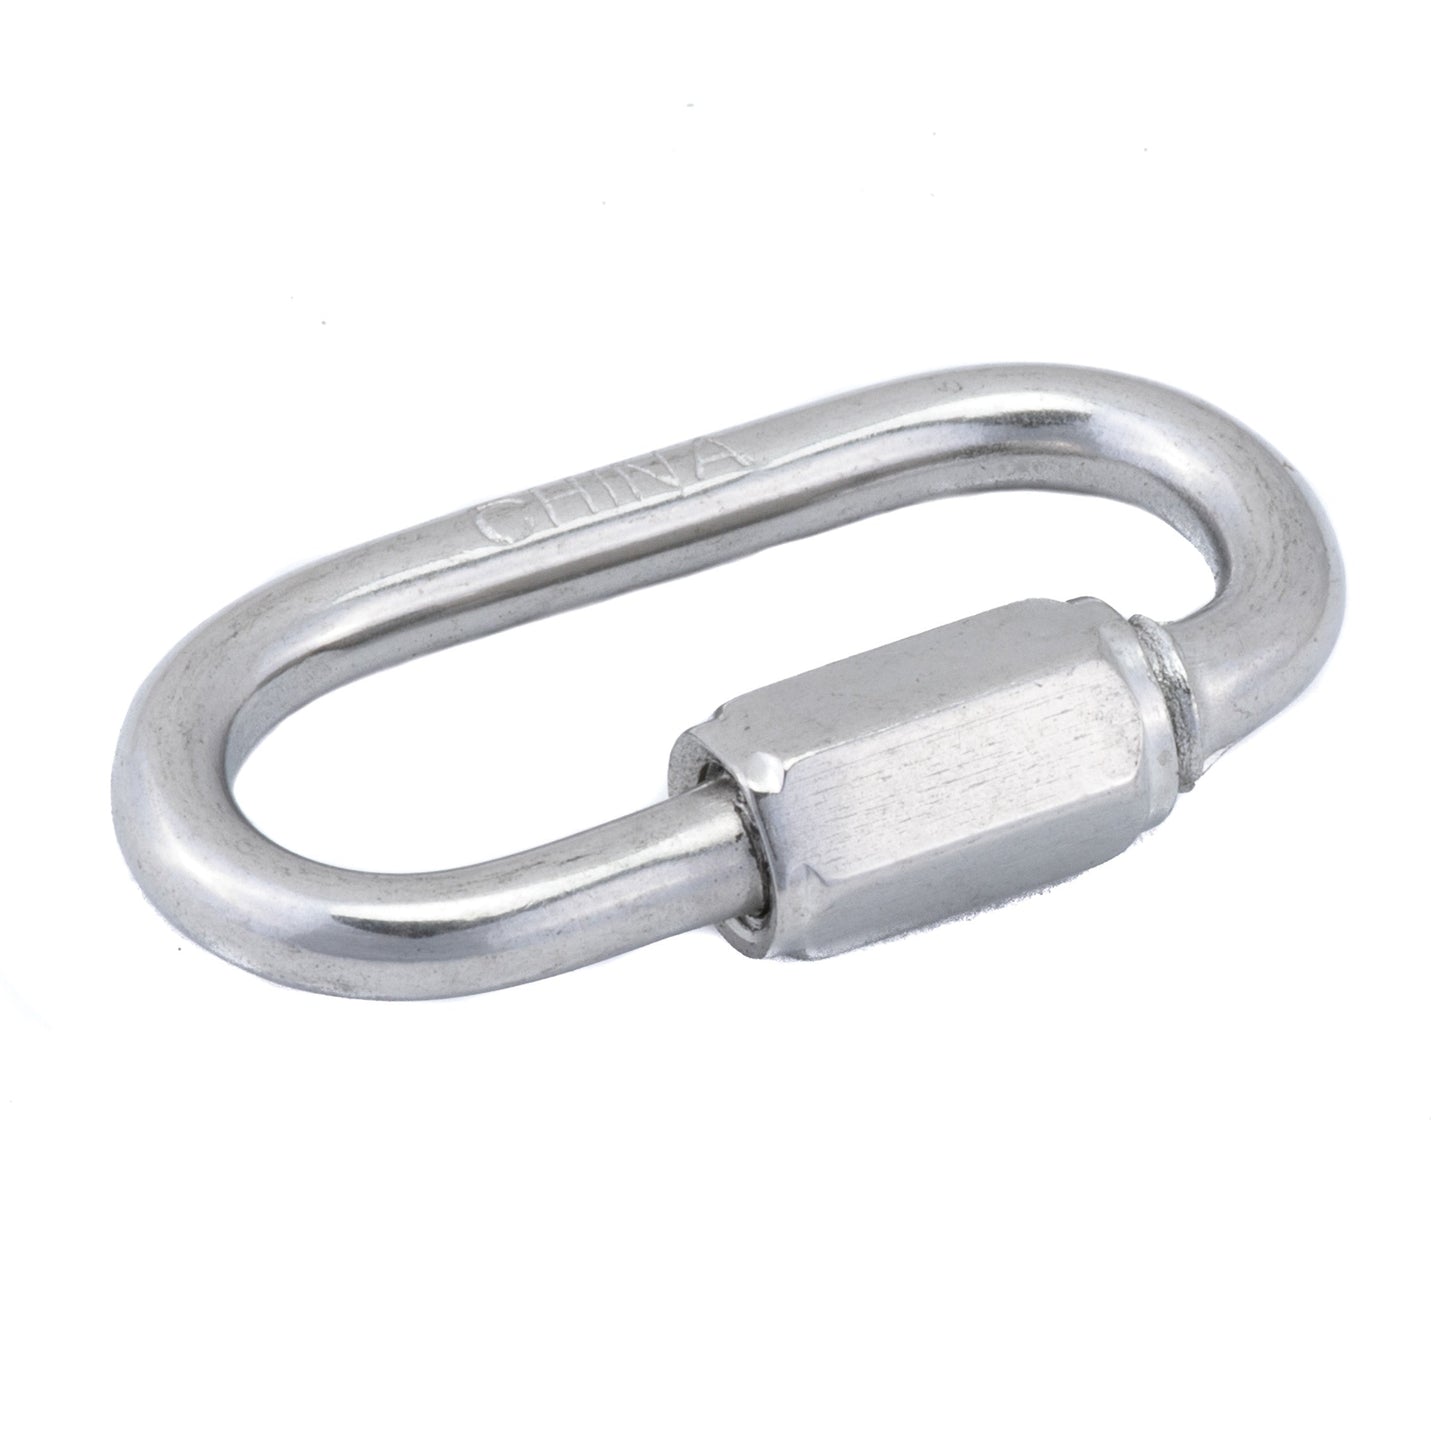 2-5/16" Stainless Steel Quick Link